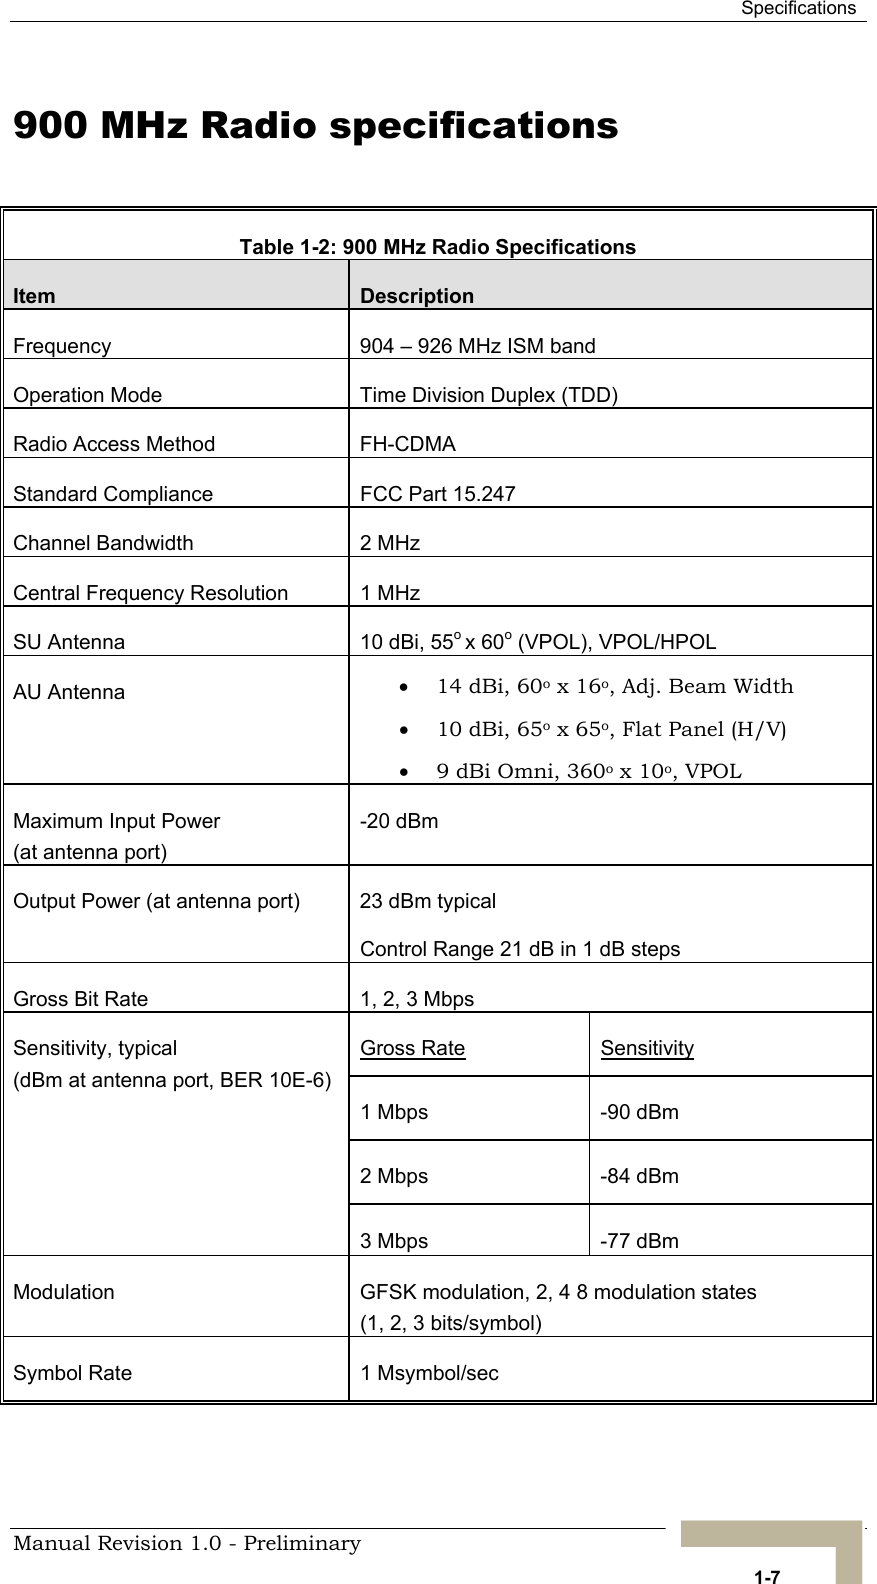  Specifications 900 MHz Radio specifications  Table 1-2: 900 MHz Radio Specifications Item  Description Frequency  904 – 926 MHz ISM band Operation Mode  Time Division Duplex (TDD) Radio Access Method  FH-CDMA Standard Compliance  FCC Part 15.247 Channel Bandwidth  2 MHz Central Frequency Resolution  1 MHz SU Antenna   10 dBi, 55o x 60o (VPOL), VPOL/HPOL AU Antenna  • 14 dBi, 60o x 16o, Adj. Beam Width • 10 dBi, 65o x 65o, Flat Panel (H/V) • 9 dBi Omni, 360o x 10o, VPOL  Maximum Input Power  (at antenna port) -20 dBm Output Power (at antenna port)  23 dBm typical Control Range 21 dB in 1 dB steps Gross Bit Rate  1, 2, 3 Mbps Gross Rate Sensitivity 1 Mbps  -90 dBm 2 Mbps  -84 dBm Sensitivity, typical  (dBm at antenna port, BER 10E-6) 3 Mbps  -77 dBm Modulation  GFSK modulation, 2, 4 8 modulation states  (1, 2, 3 bits/symbol) Symbol Rate  1 Msymbol/sec Manual Revision 1.0 - Preliminary   1-7 